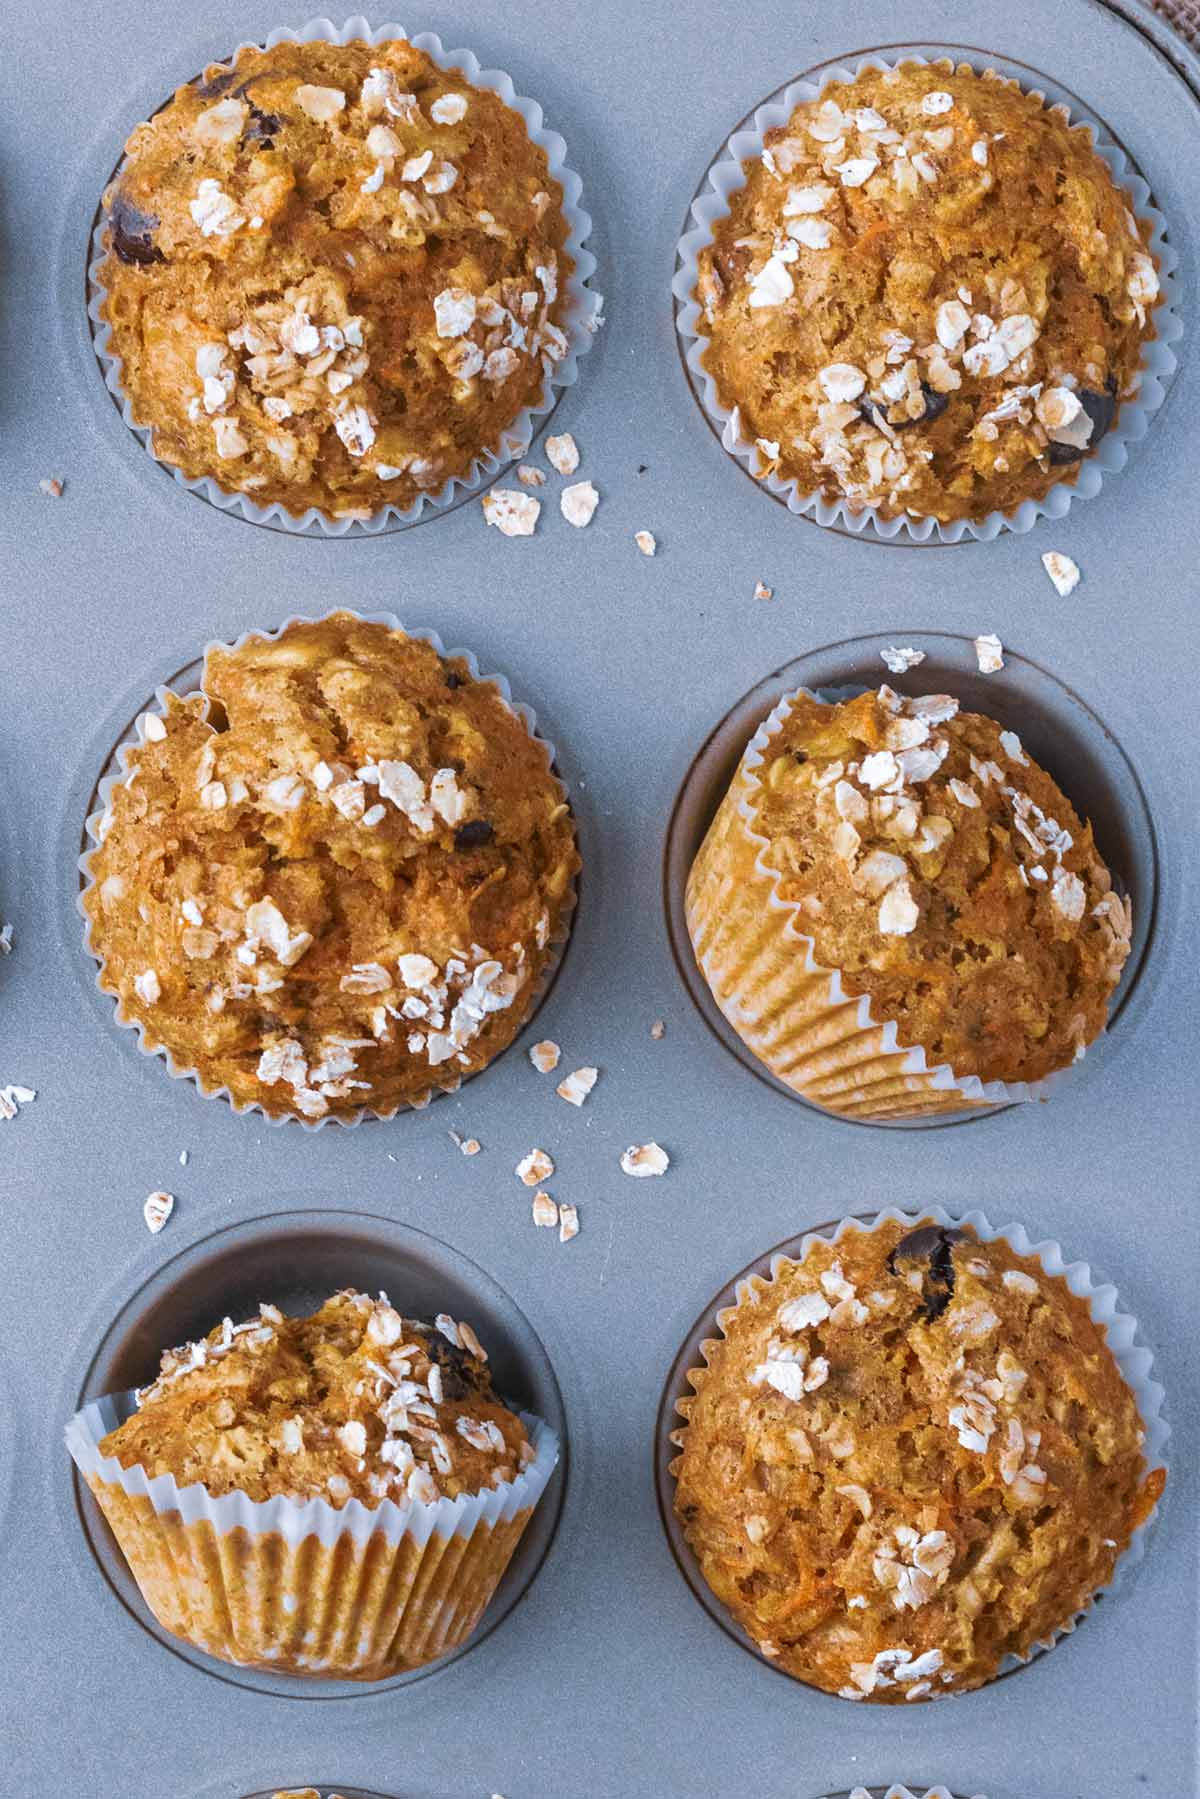 Six banana muffins in a baking tray, two muffins are turned on their sides.